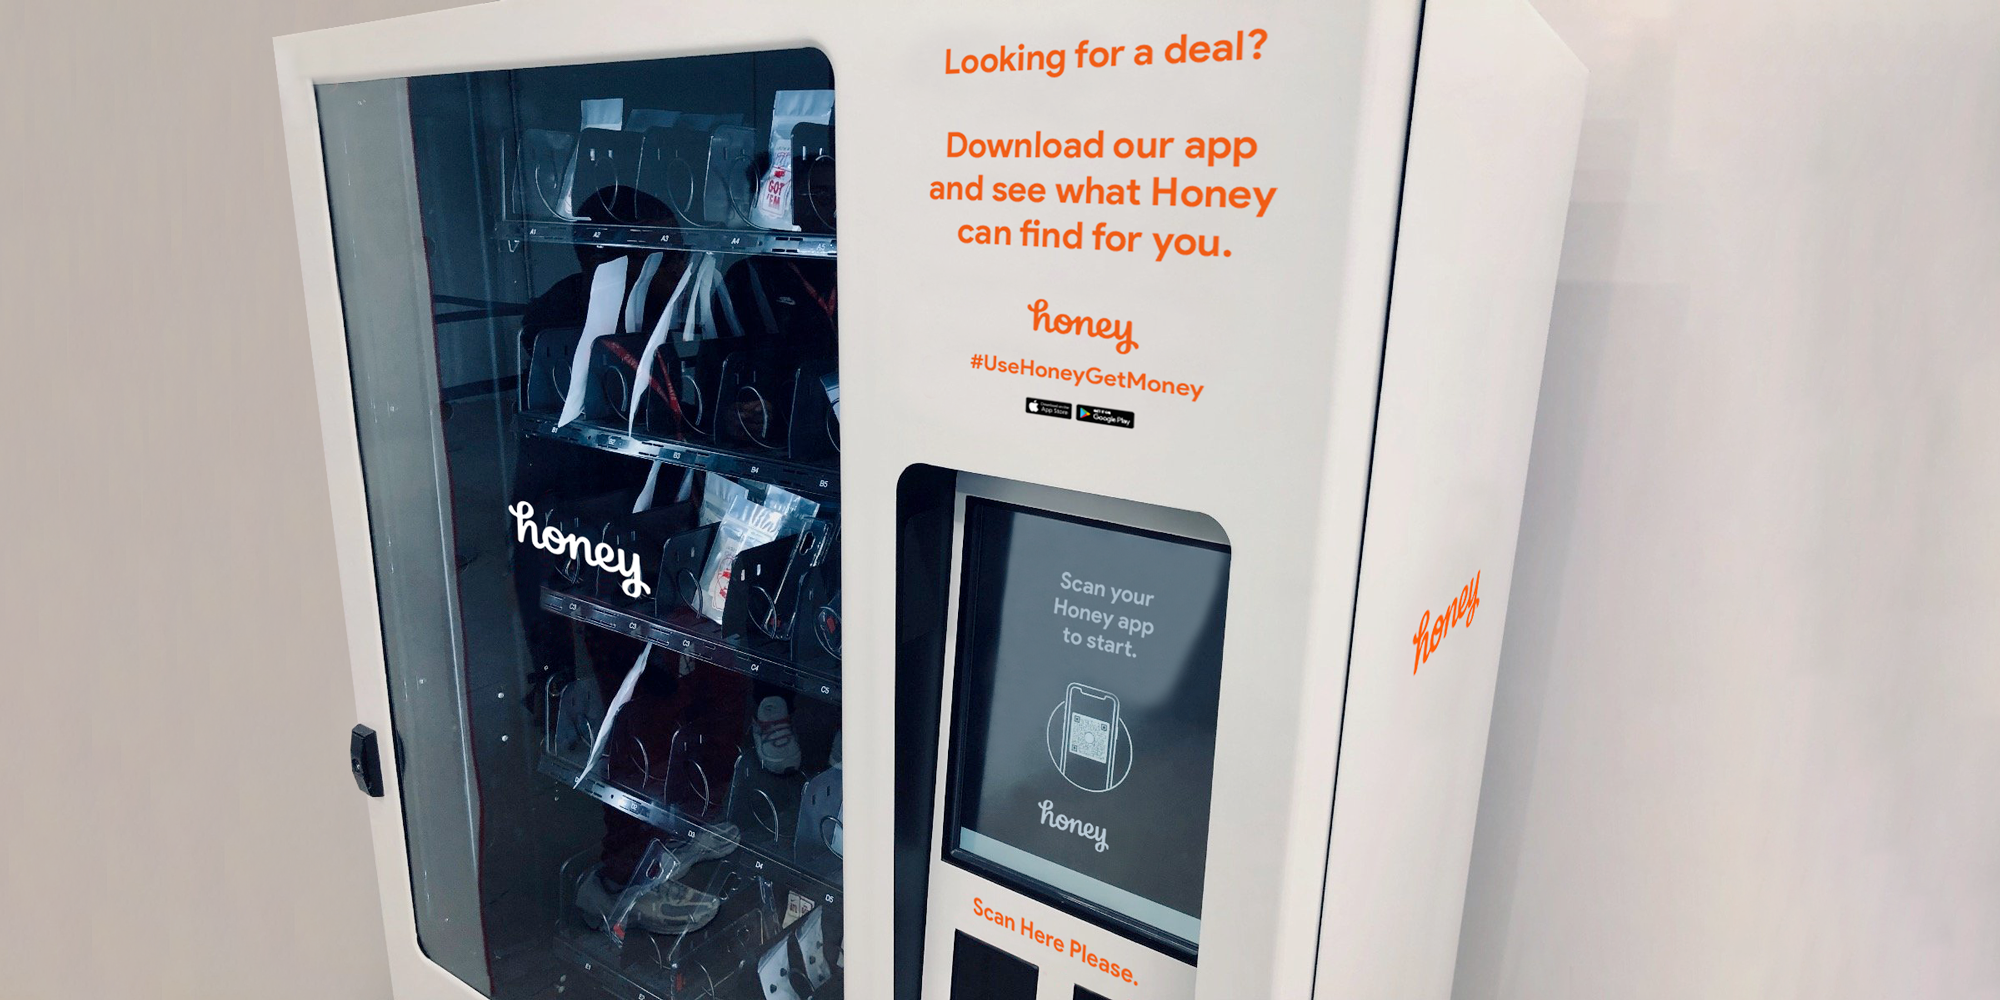  We’ll set up vending machines that feature great deals — but you can only use it if you download the Honey app. 